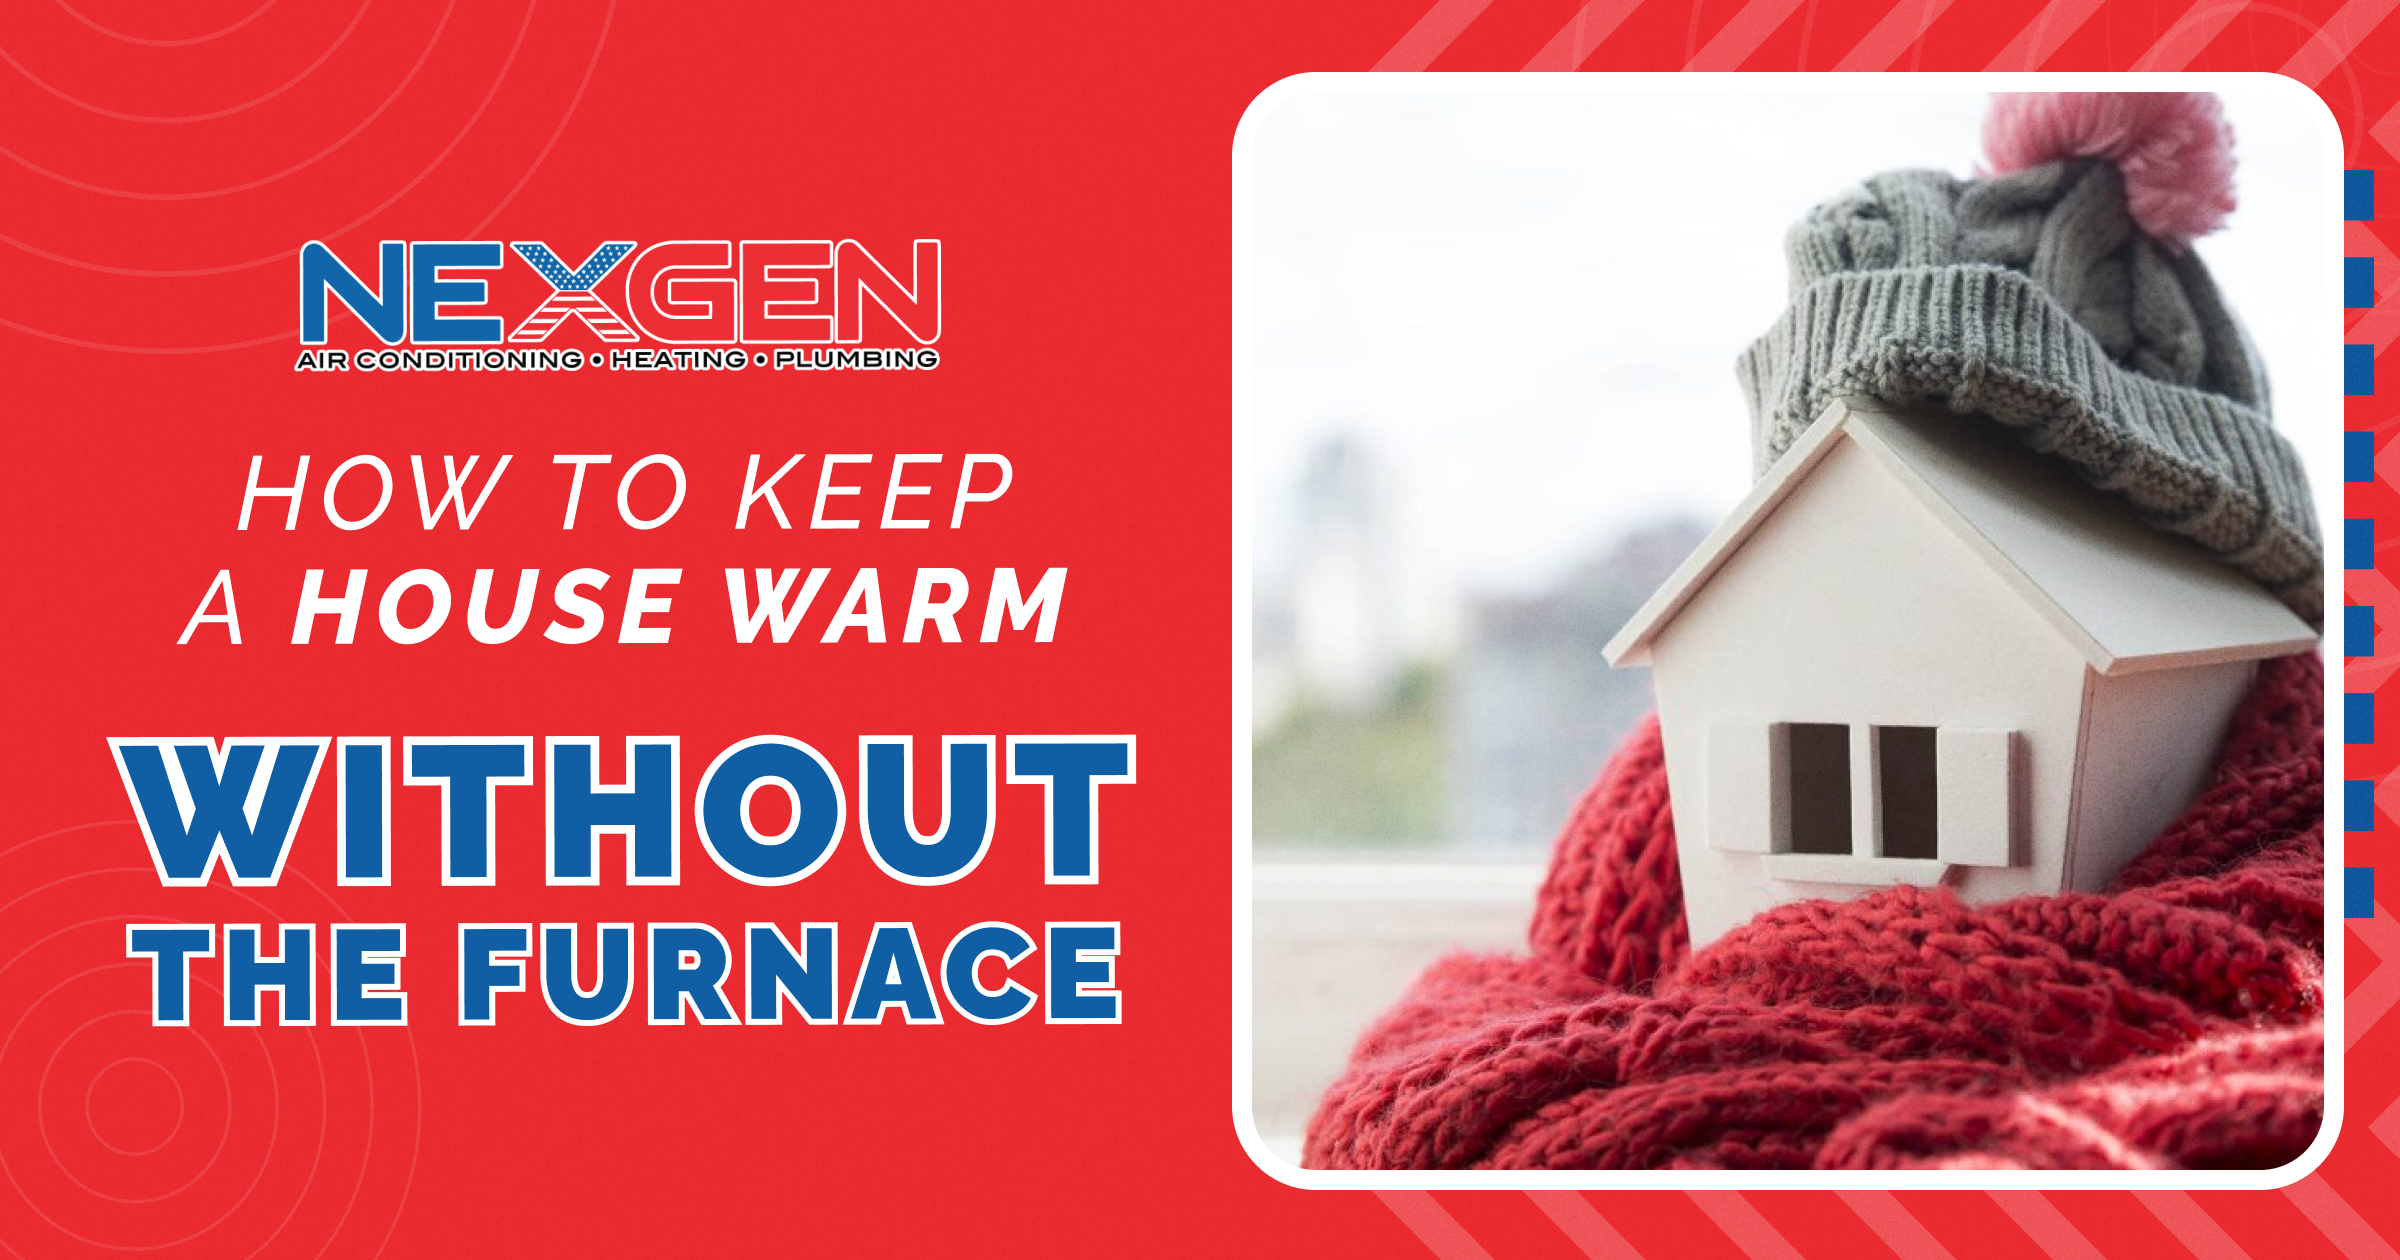 NexGen How to Keep a House Warm Without the Furnace